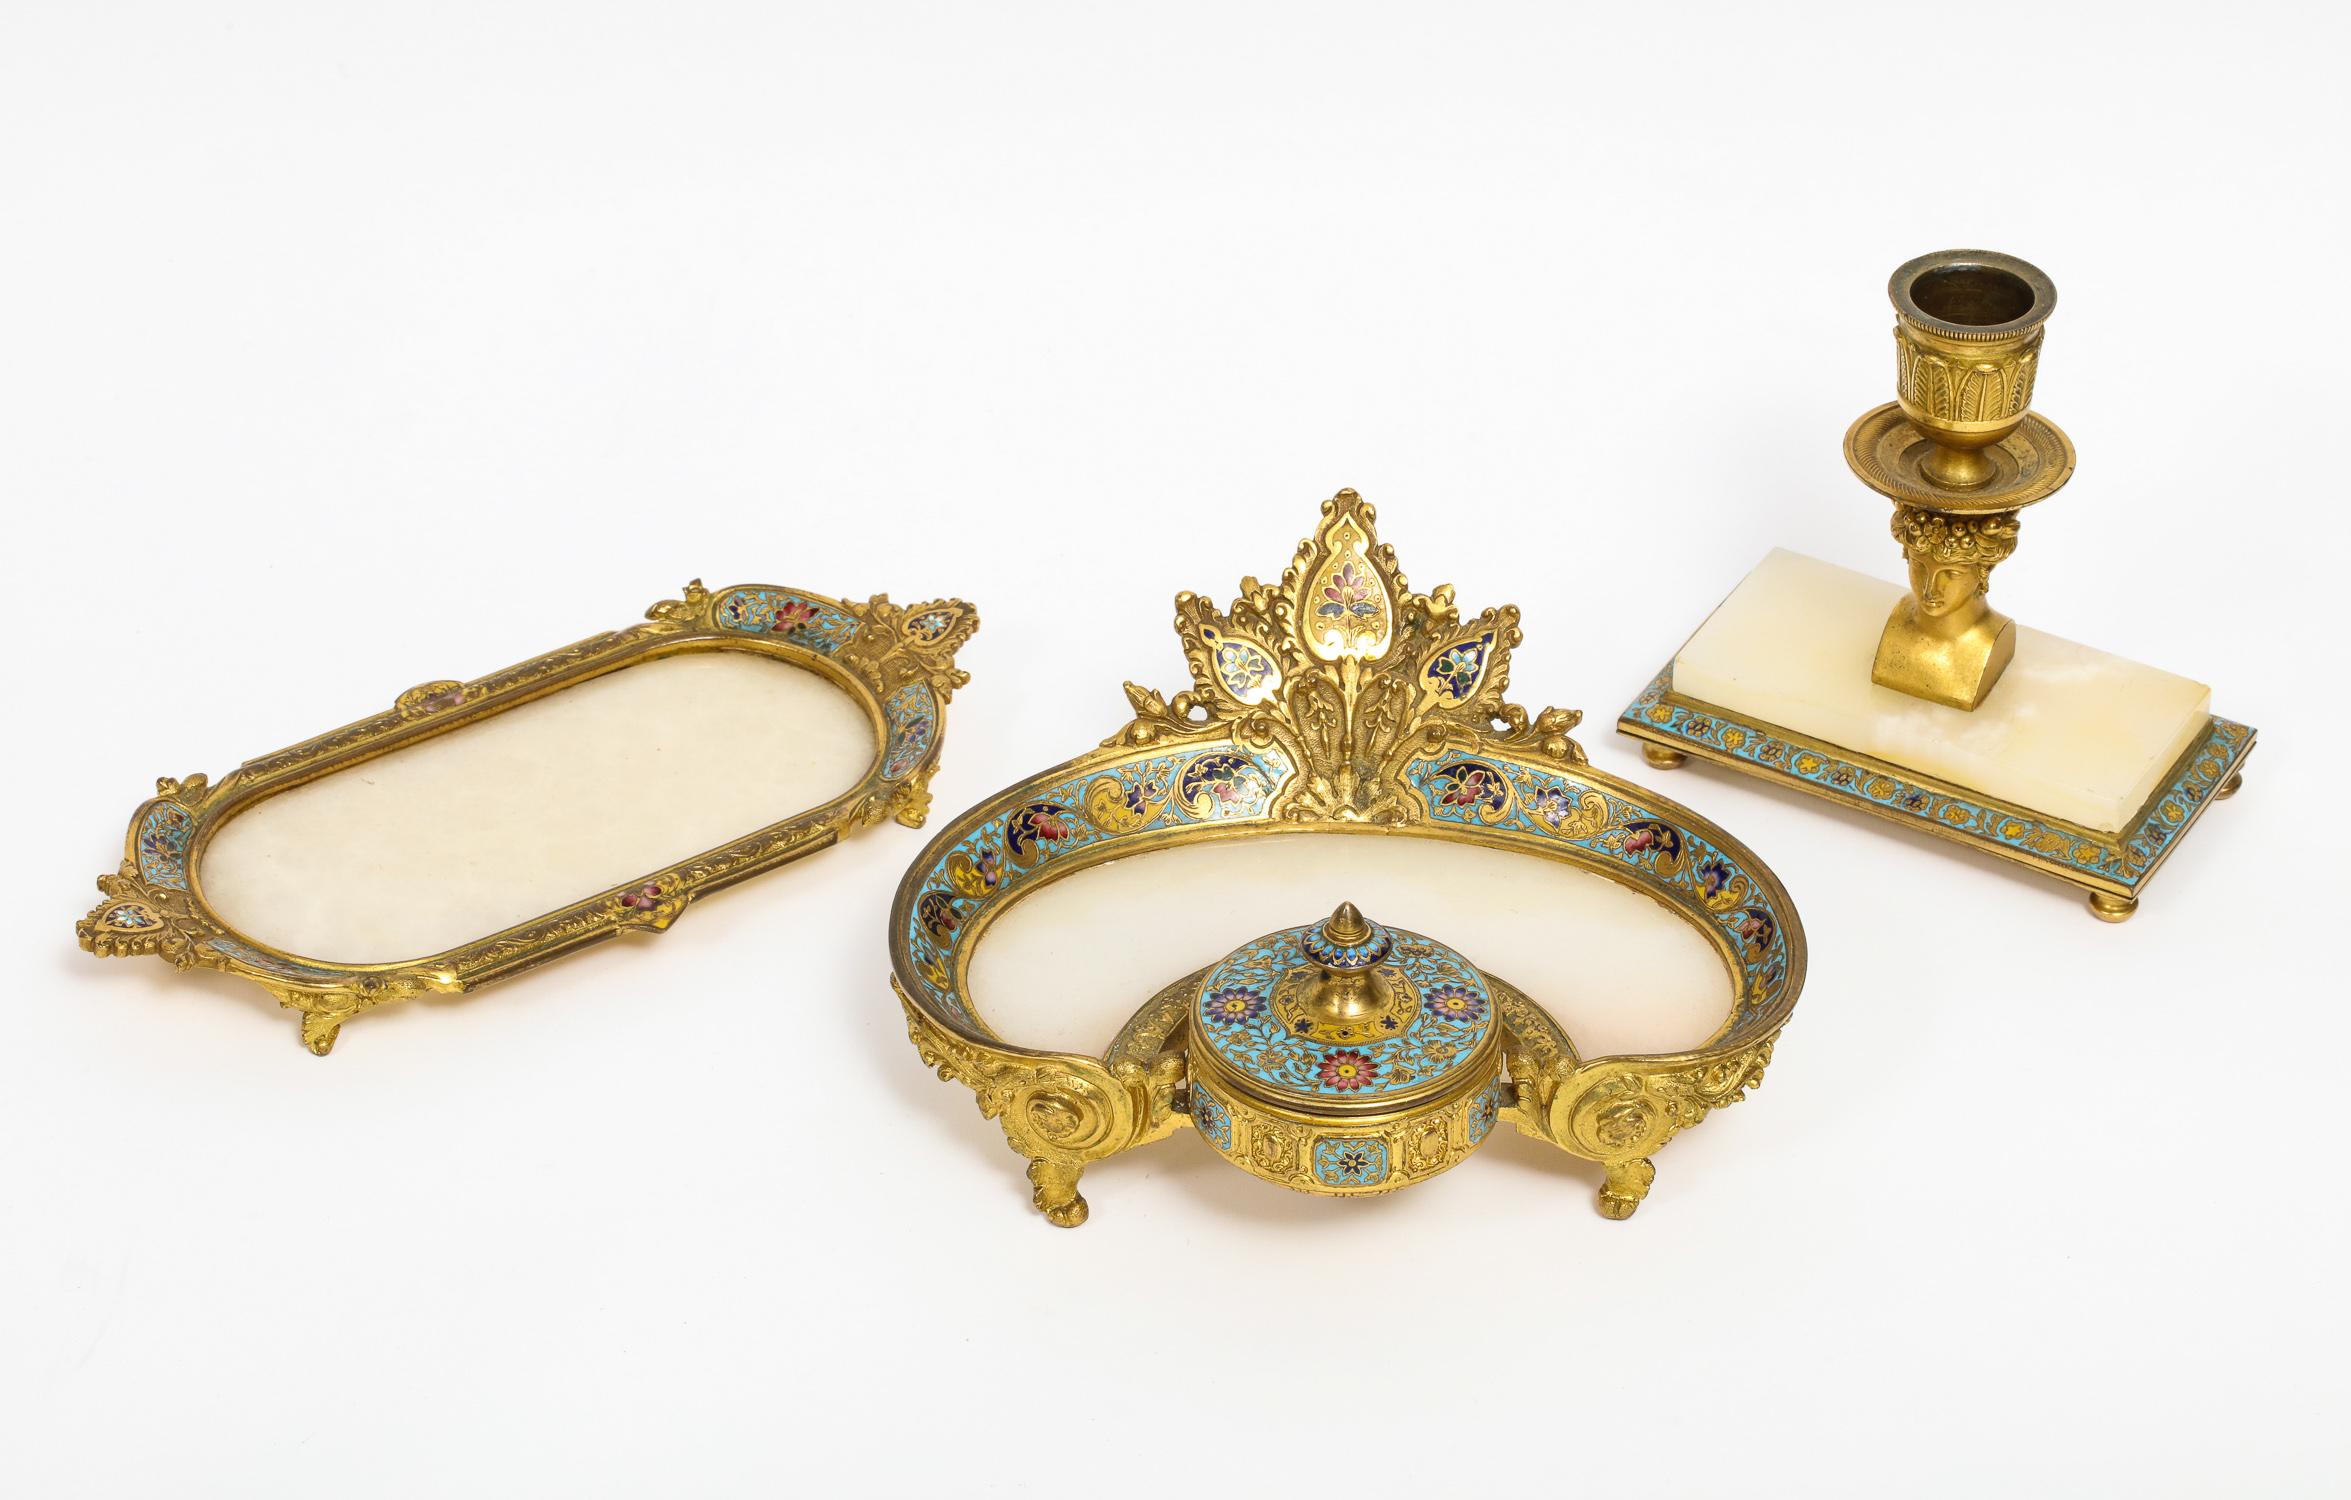 French ormolu bronze, onyx, and champlevé cloisonné enamel three-piece desk set, comprising of an inkwell / encrier, a platter / tray, and a candlestick with a female bust,

circa 1880.

Very fine quality ormolu and enamel. An original set,